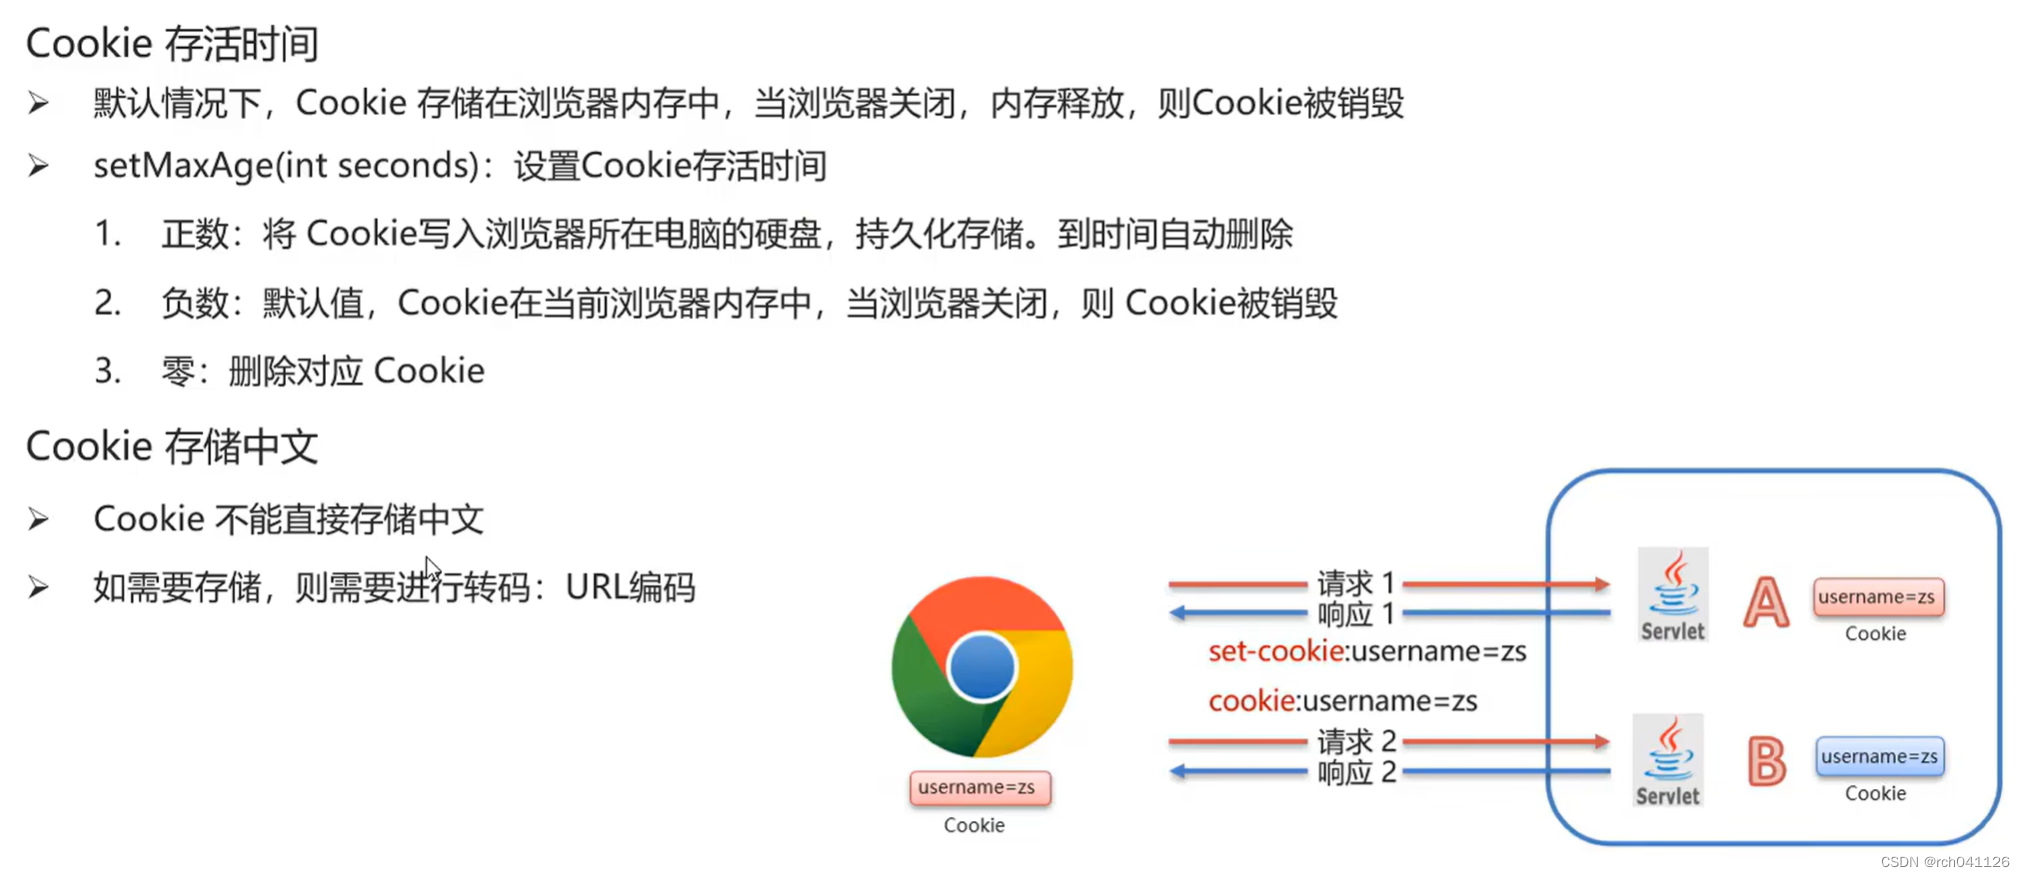 Cookie使用